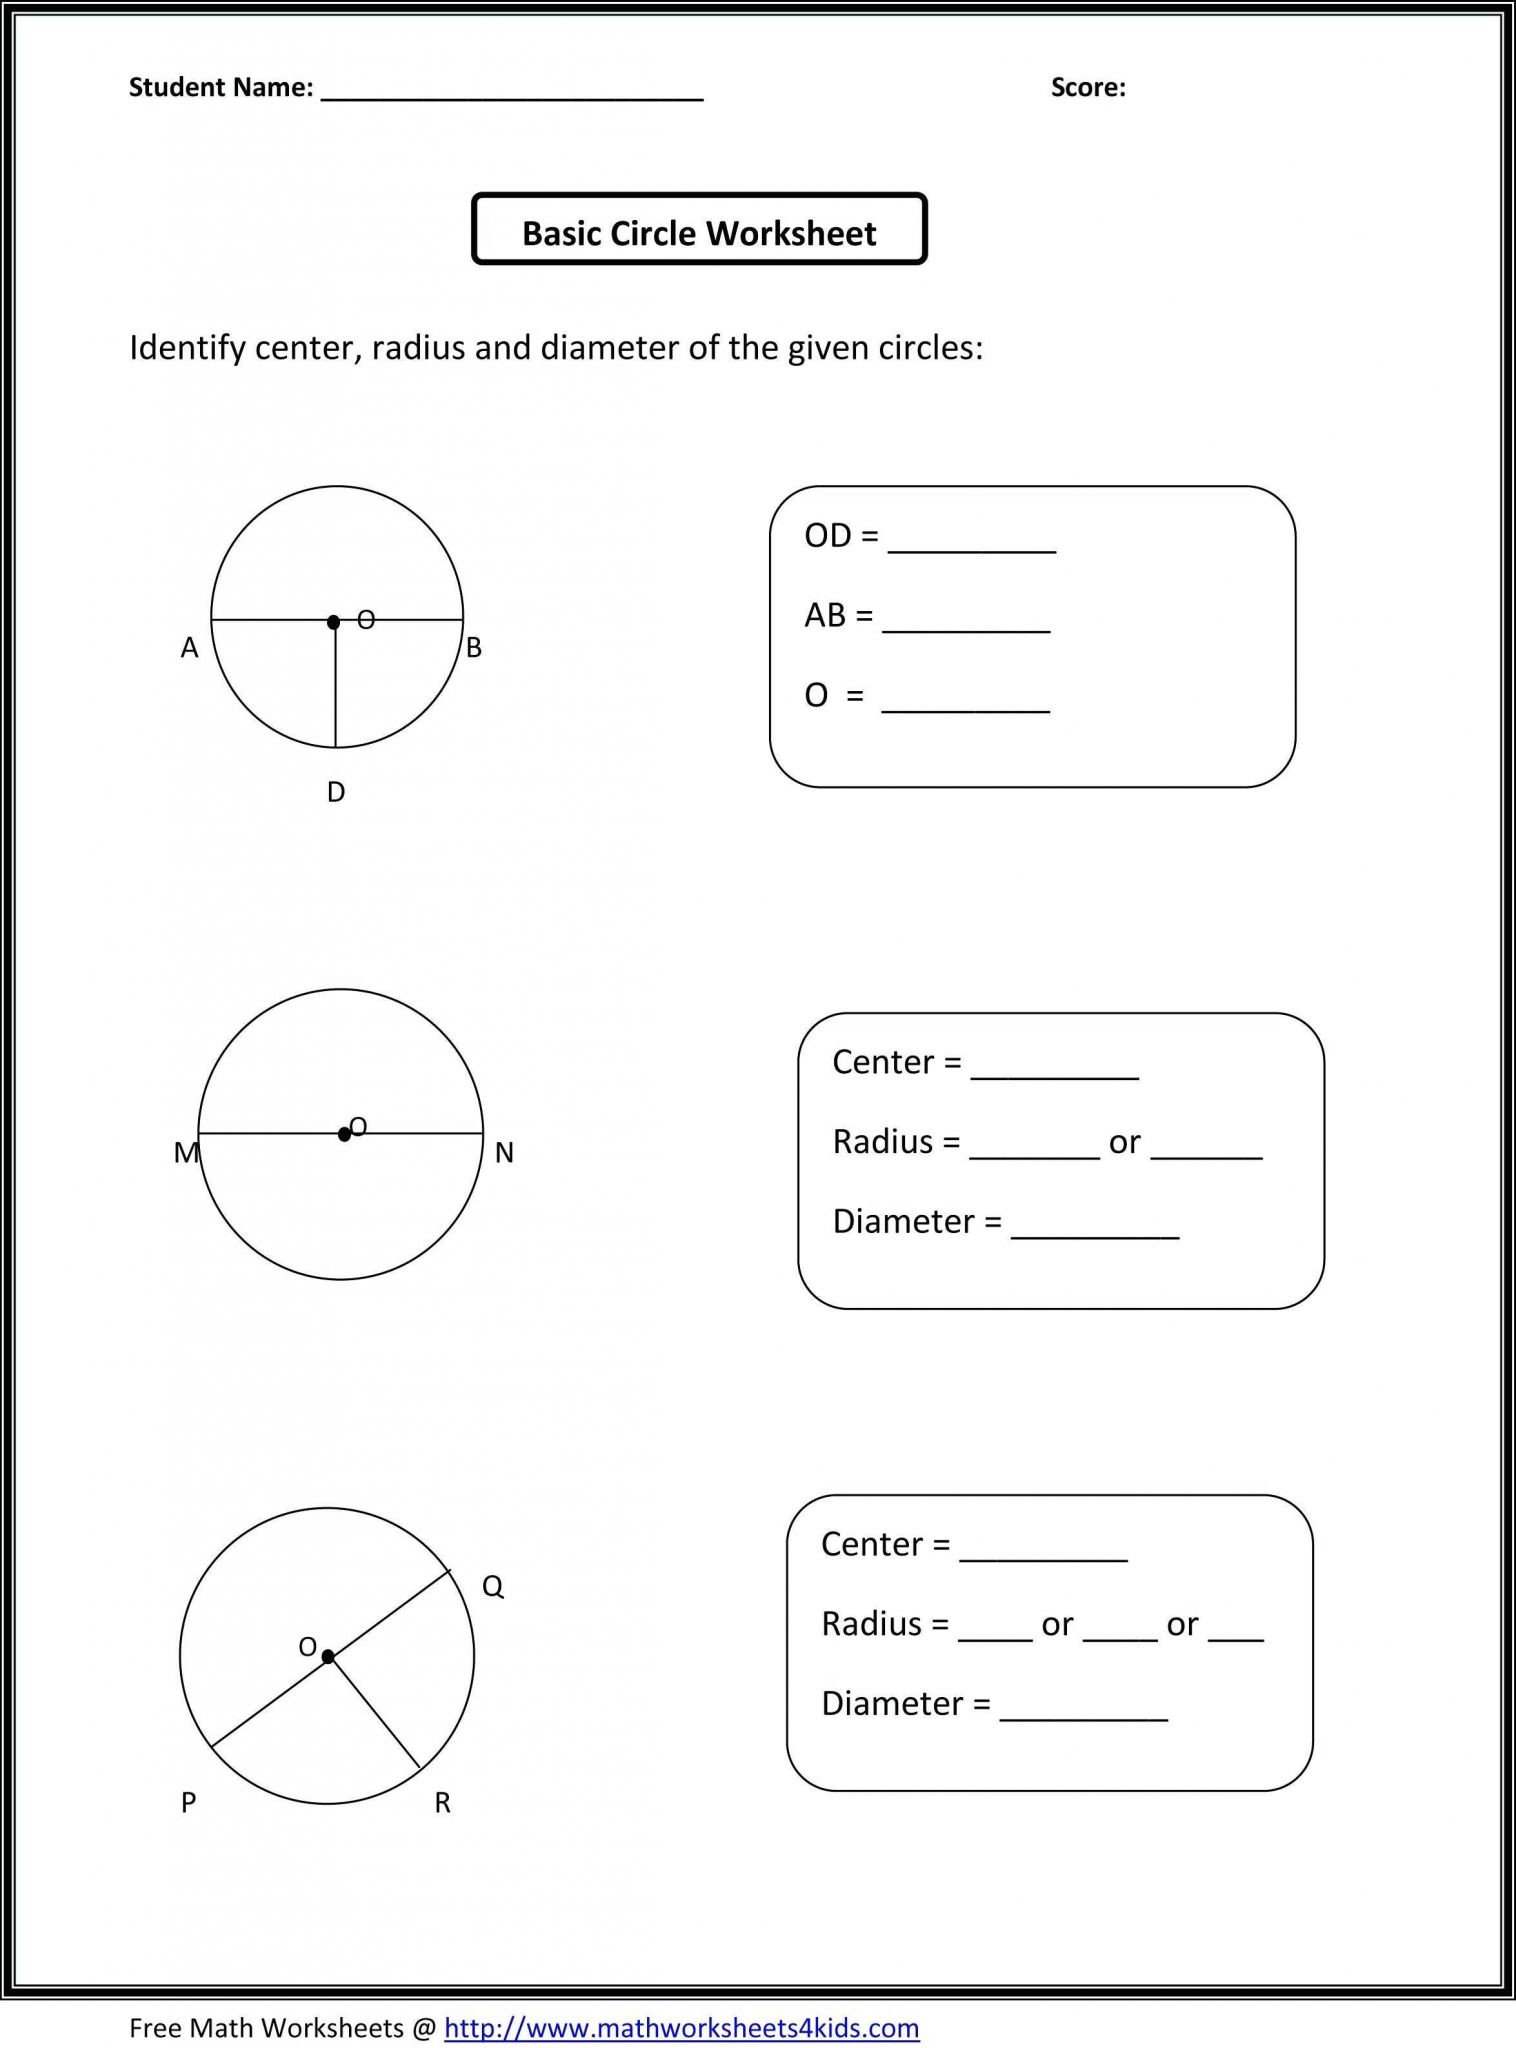 Times Tables Worksheets 1 12 Pdf as Well as Pleting the Square Circles Worksheet Pdf Kidz Activities